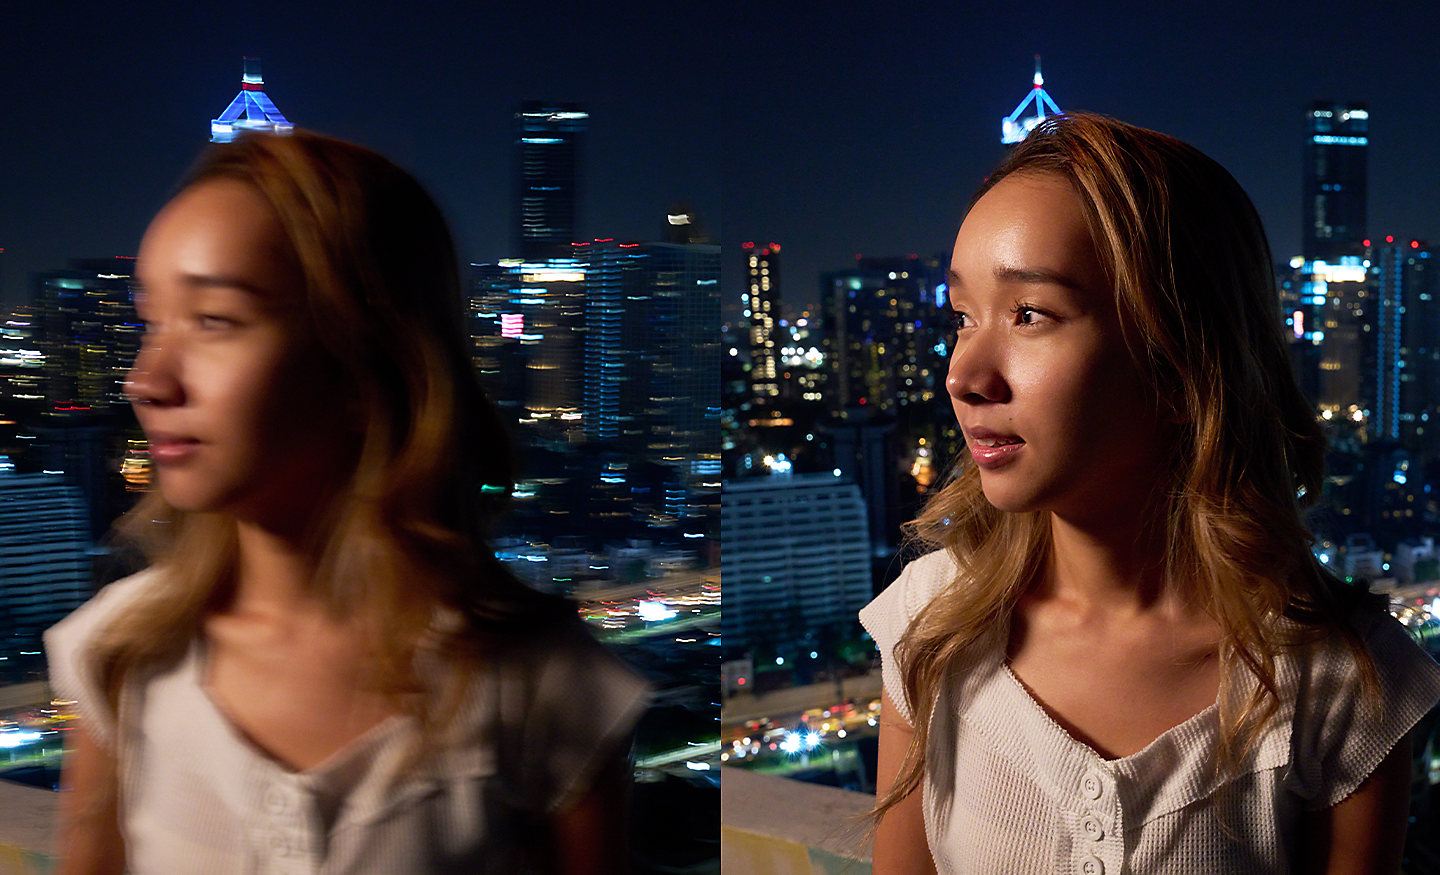 Side-by-side images of a young woman at night – the left-hand image is blurred, the right-hand image is sharp